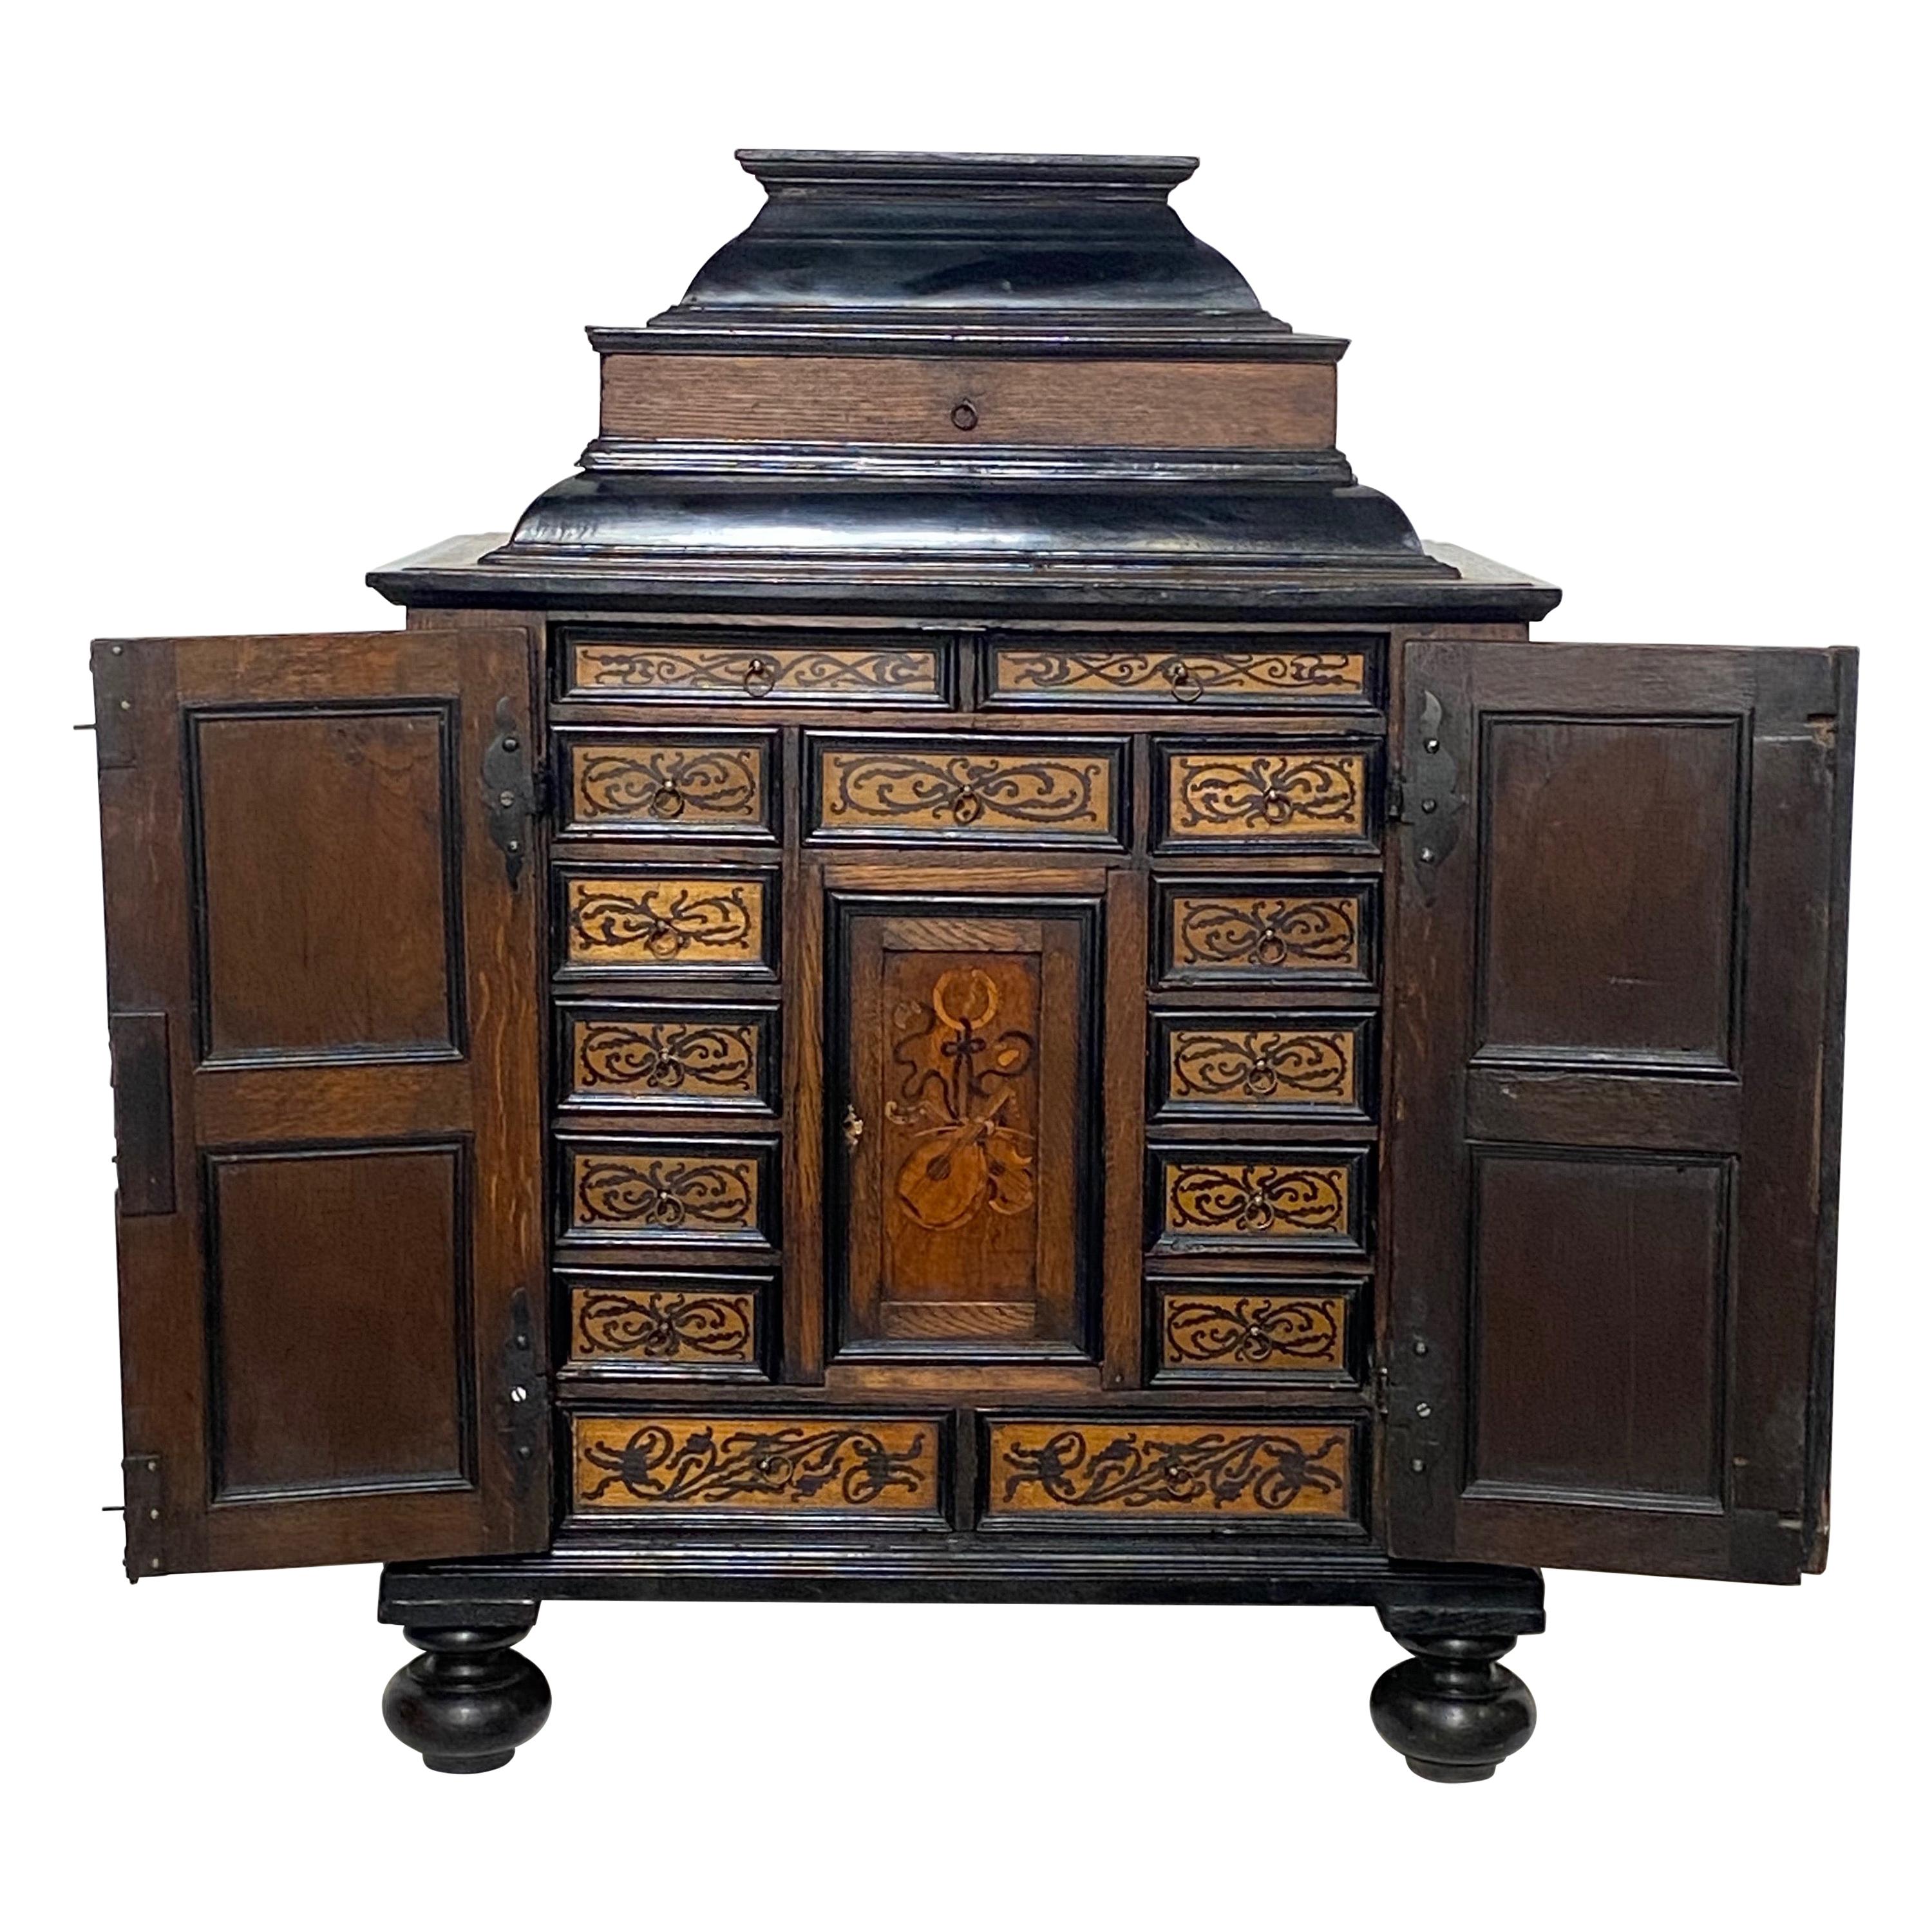 Large Northern European Table Top Jewelry / Collectors Cabinet, 19th Century